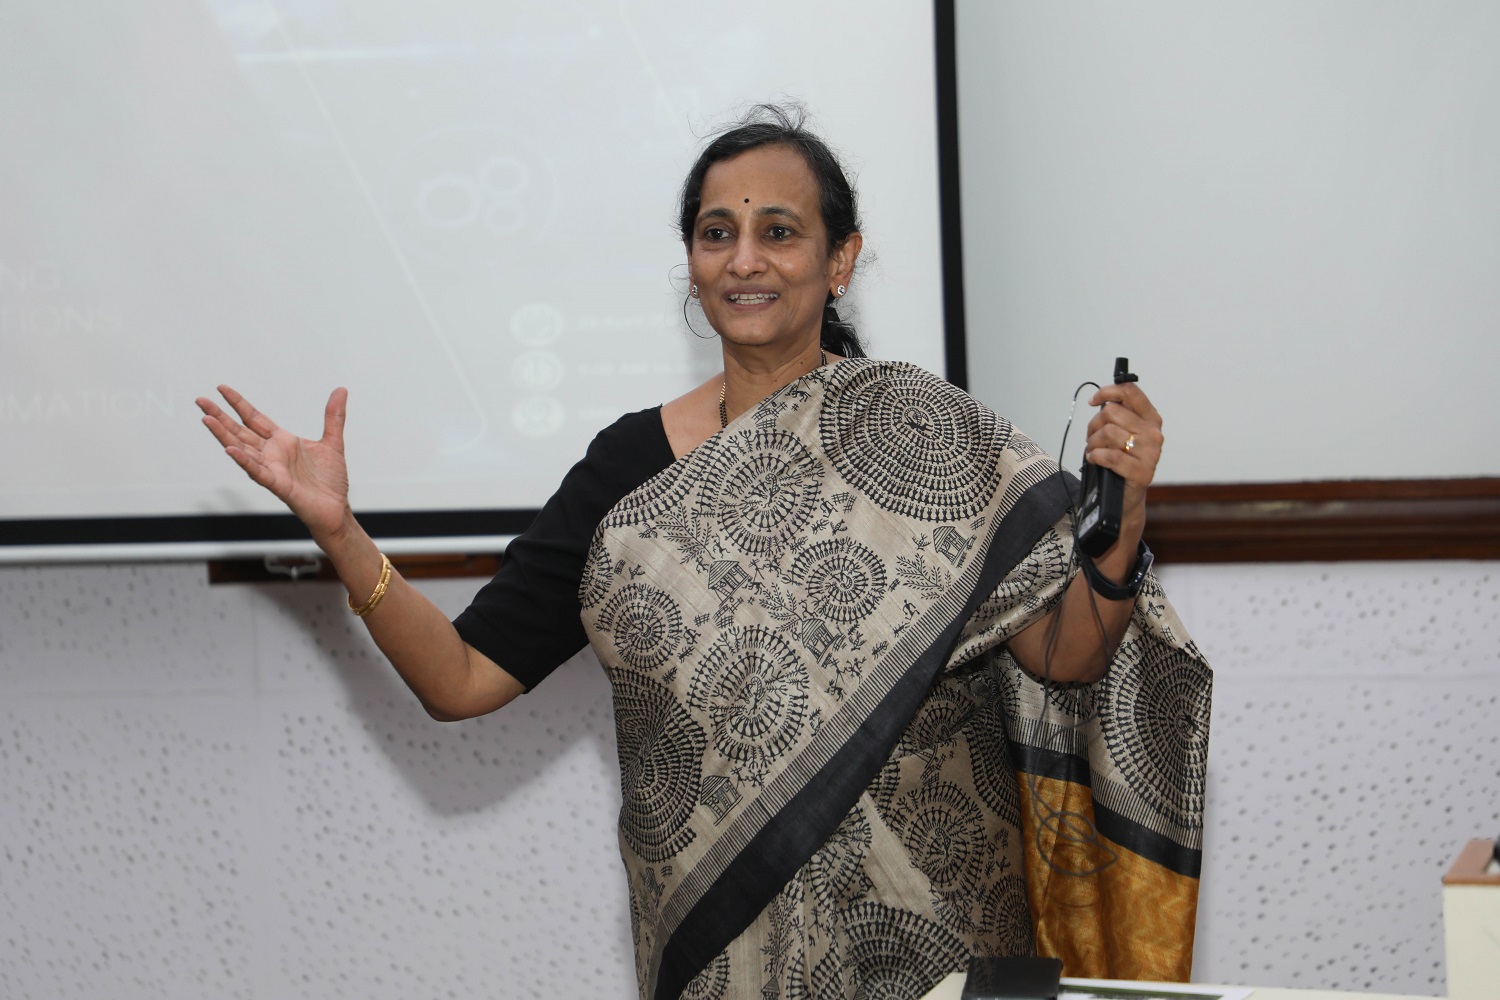 Prof. Padmini Srinivasan, Chairperson, Executive Education Programmes, IIM Bangalore, welcomes the participants of the conference on ‘Building and Scaling Organizations in Digital Transformation’, hosted by the Office of Executive Education Programmes at IIMB, on 29th April 2023. Prof. Padmini Srinivasan is also the Chairperson of the Centre for Corporate Governance & Sustainability and faculty from the Finance & Accounting area, IIMB.